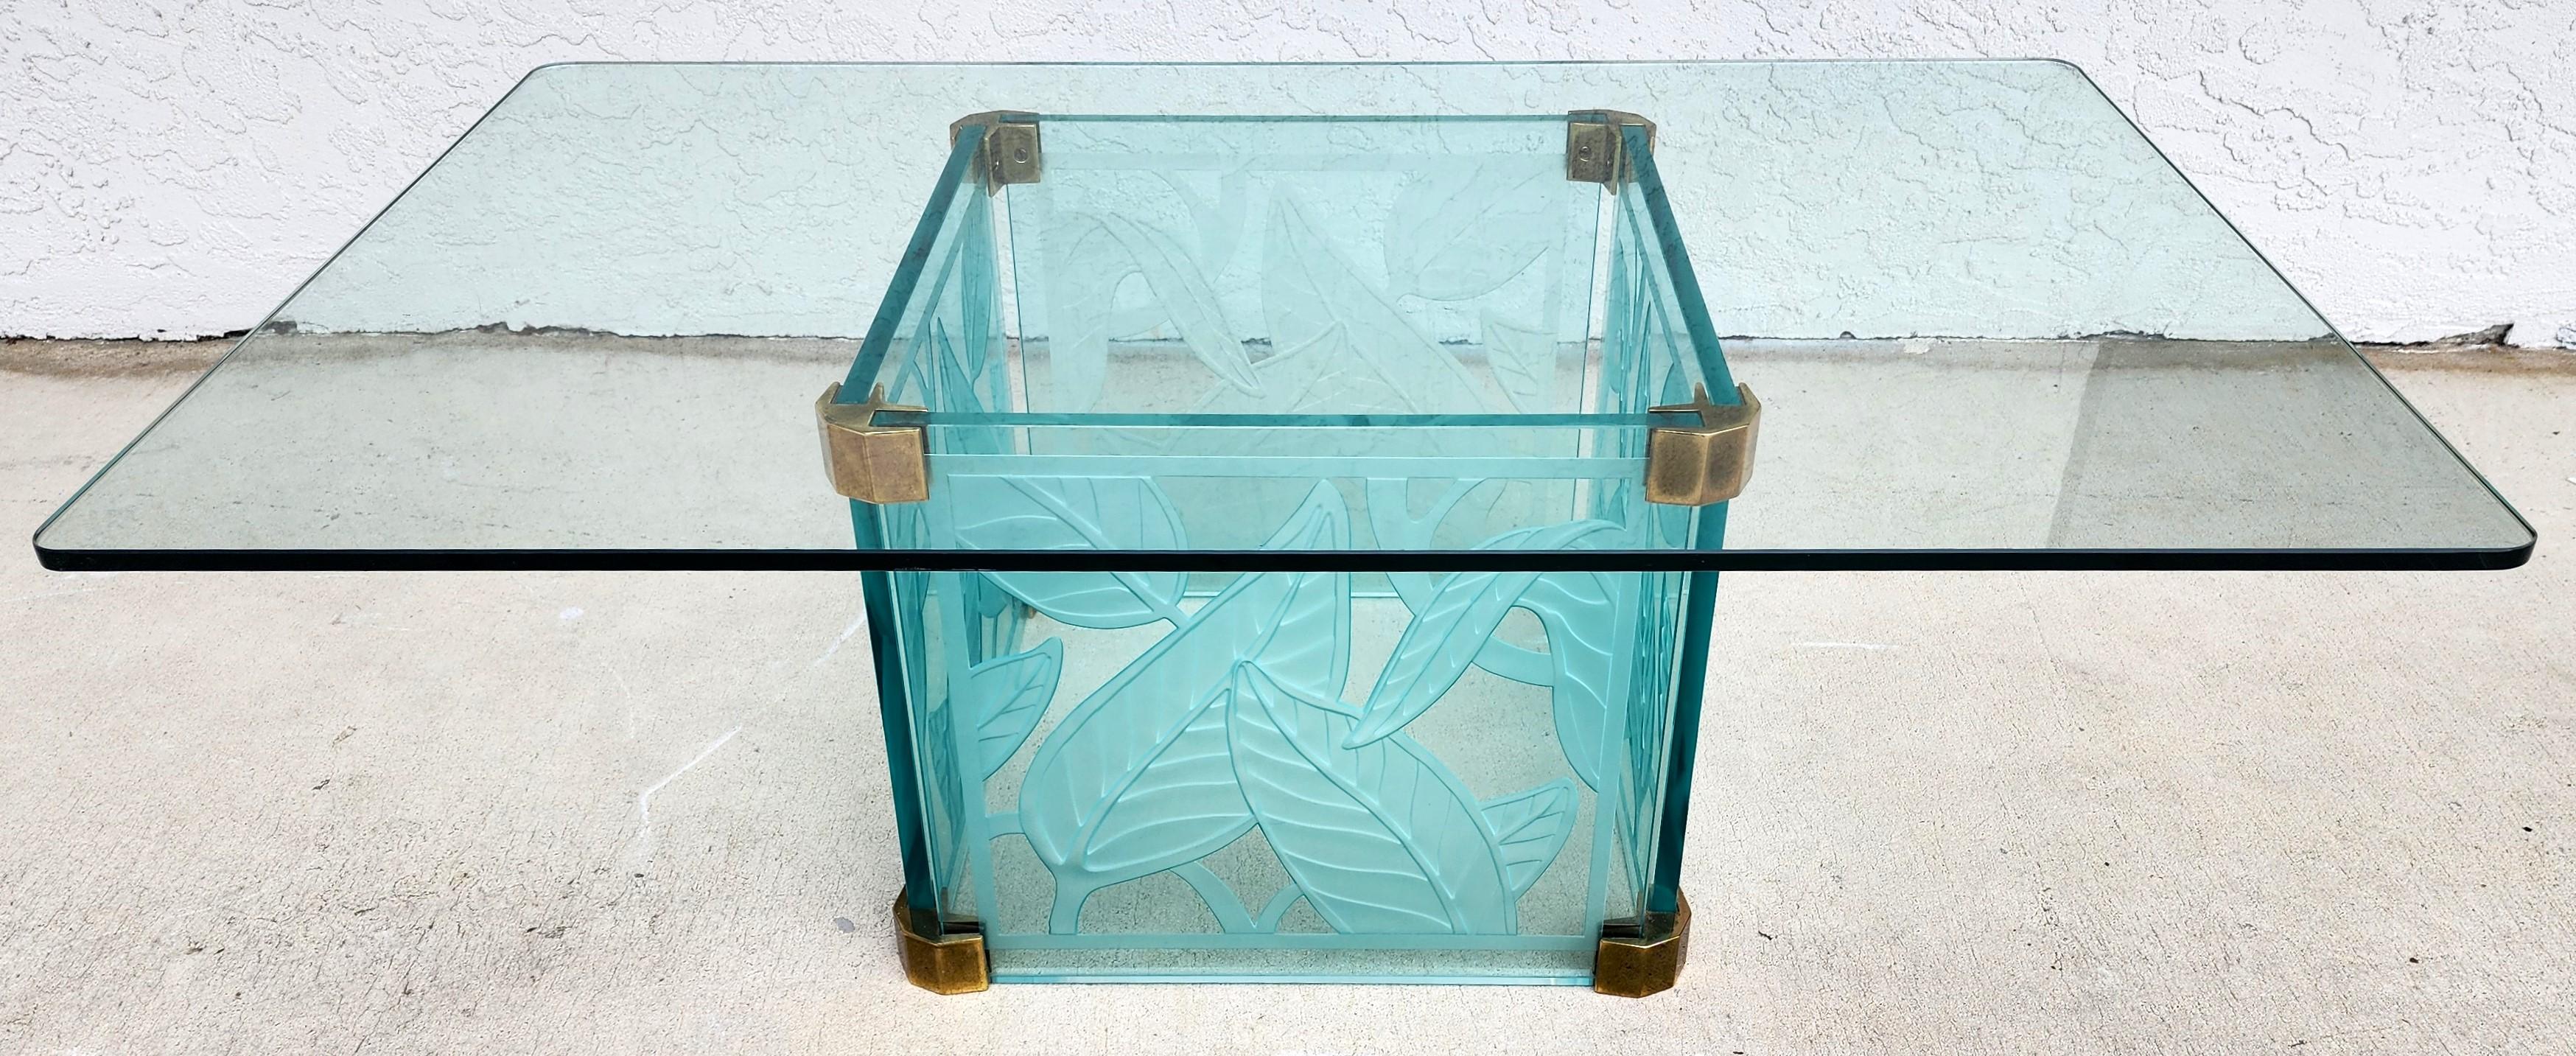 For FULL item description click on CONTINUE READING at the bottom of this page.

Offering One Of Our Recent Palm Beach Estate Fine Furniture Acquisitions Of A
Highly Etched Glass Dennis Abbe Style Coastal Palm Beach Coffee Cocktail Table
The base